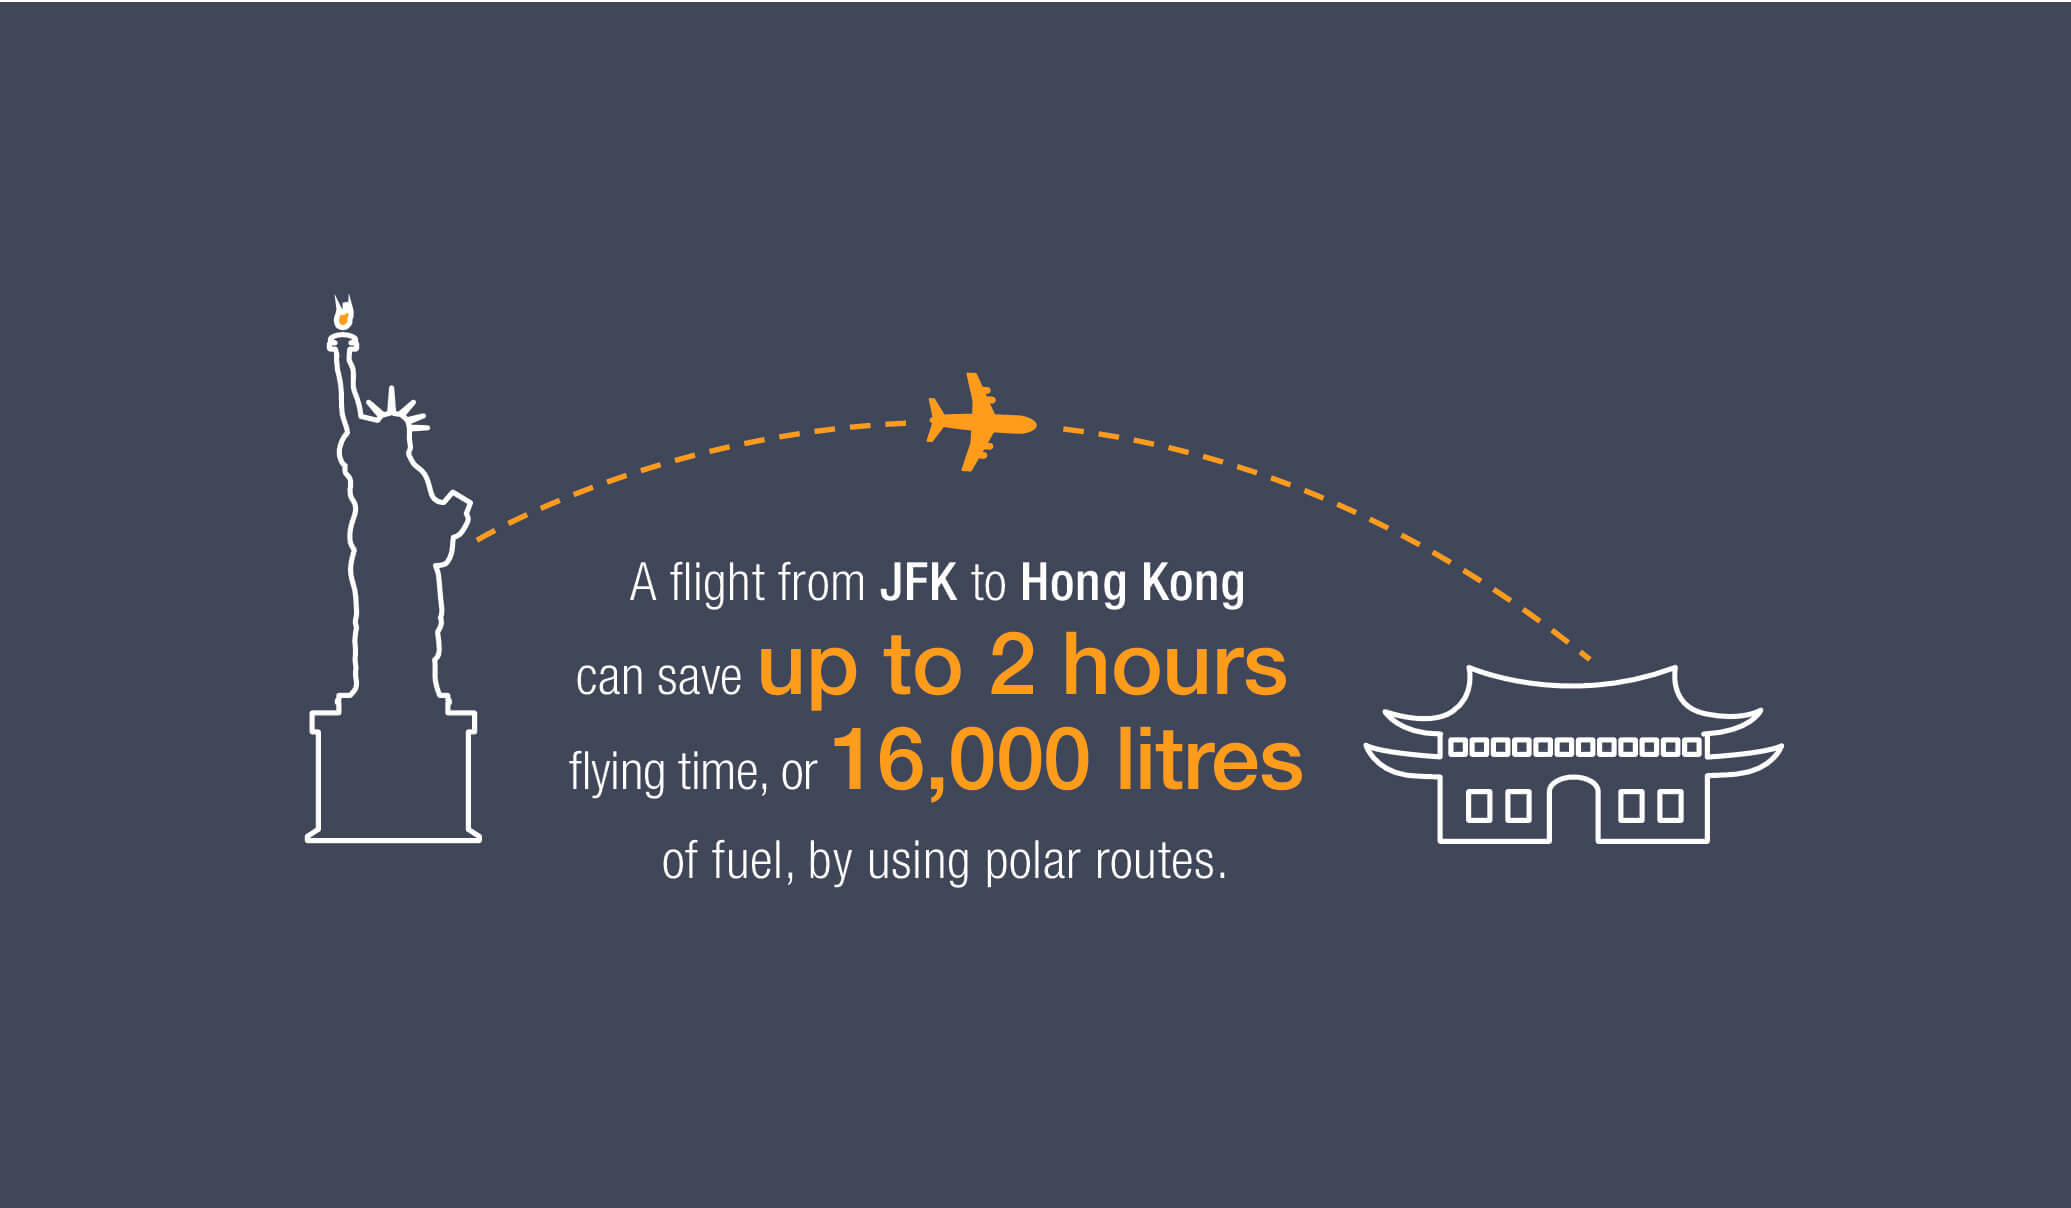 A flight from JFK to Hong Kong can save over 2 hours flying time, or 16,000 litres of fuel, by using polar routes